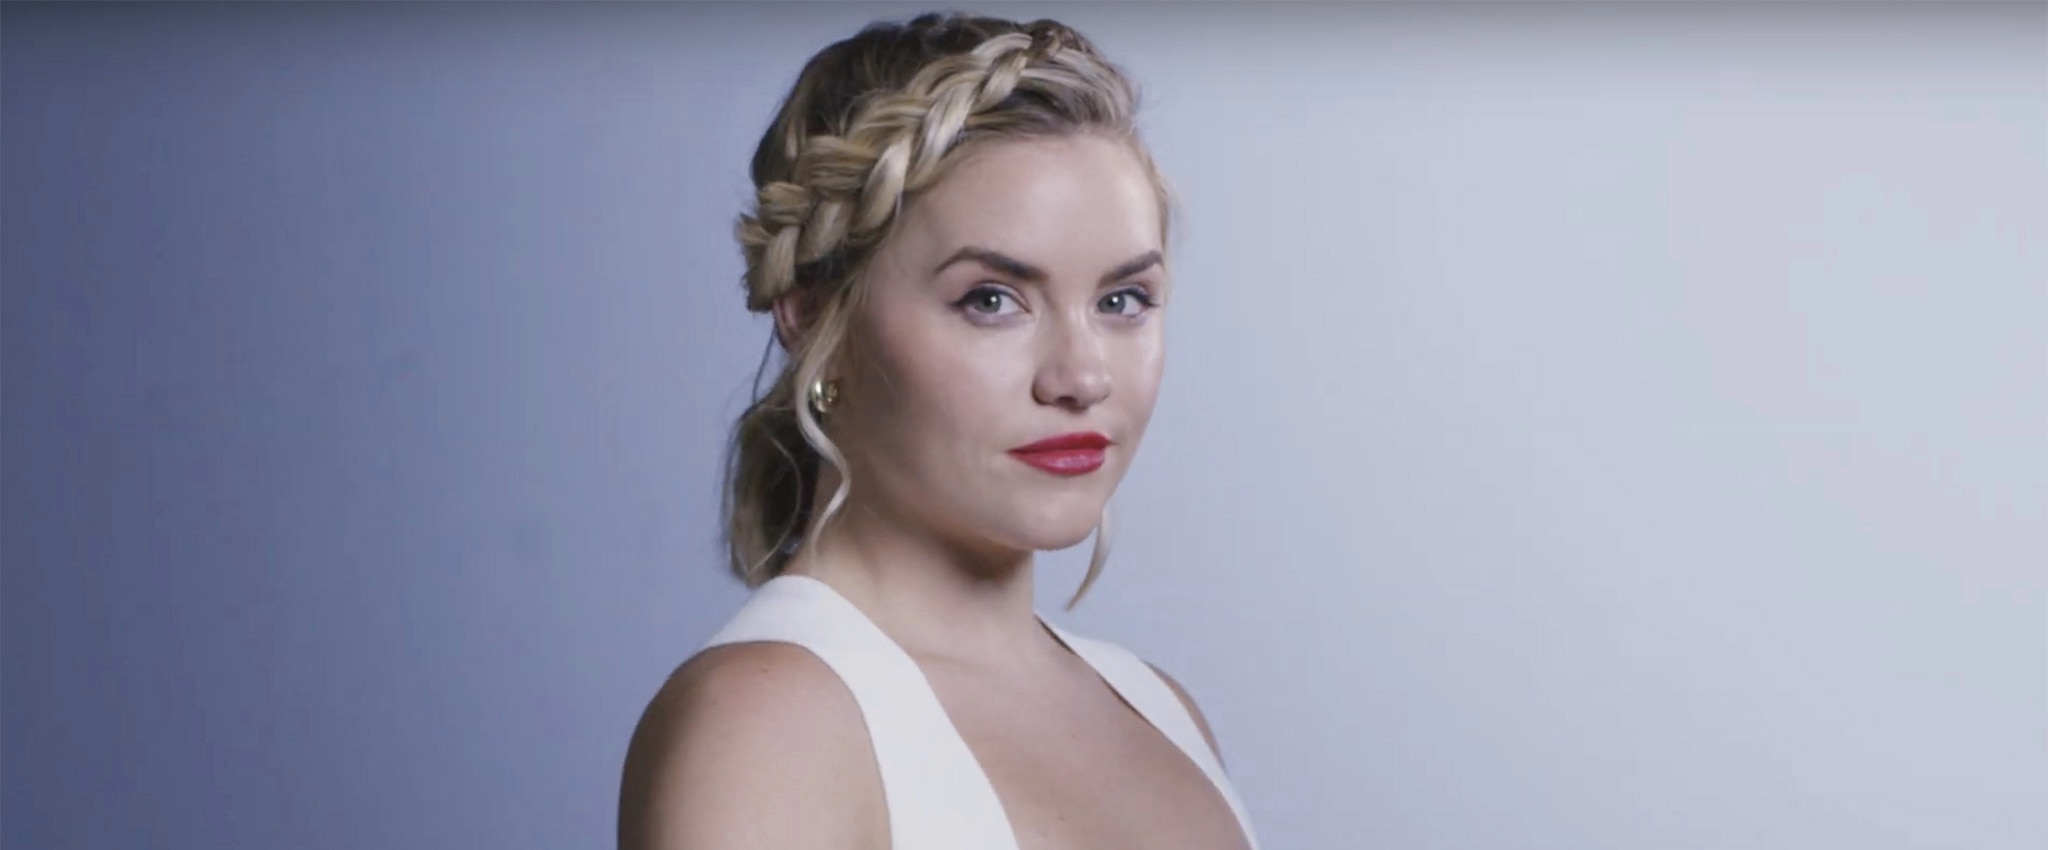 Learn how to do a simple ponytail braid.